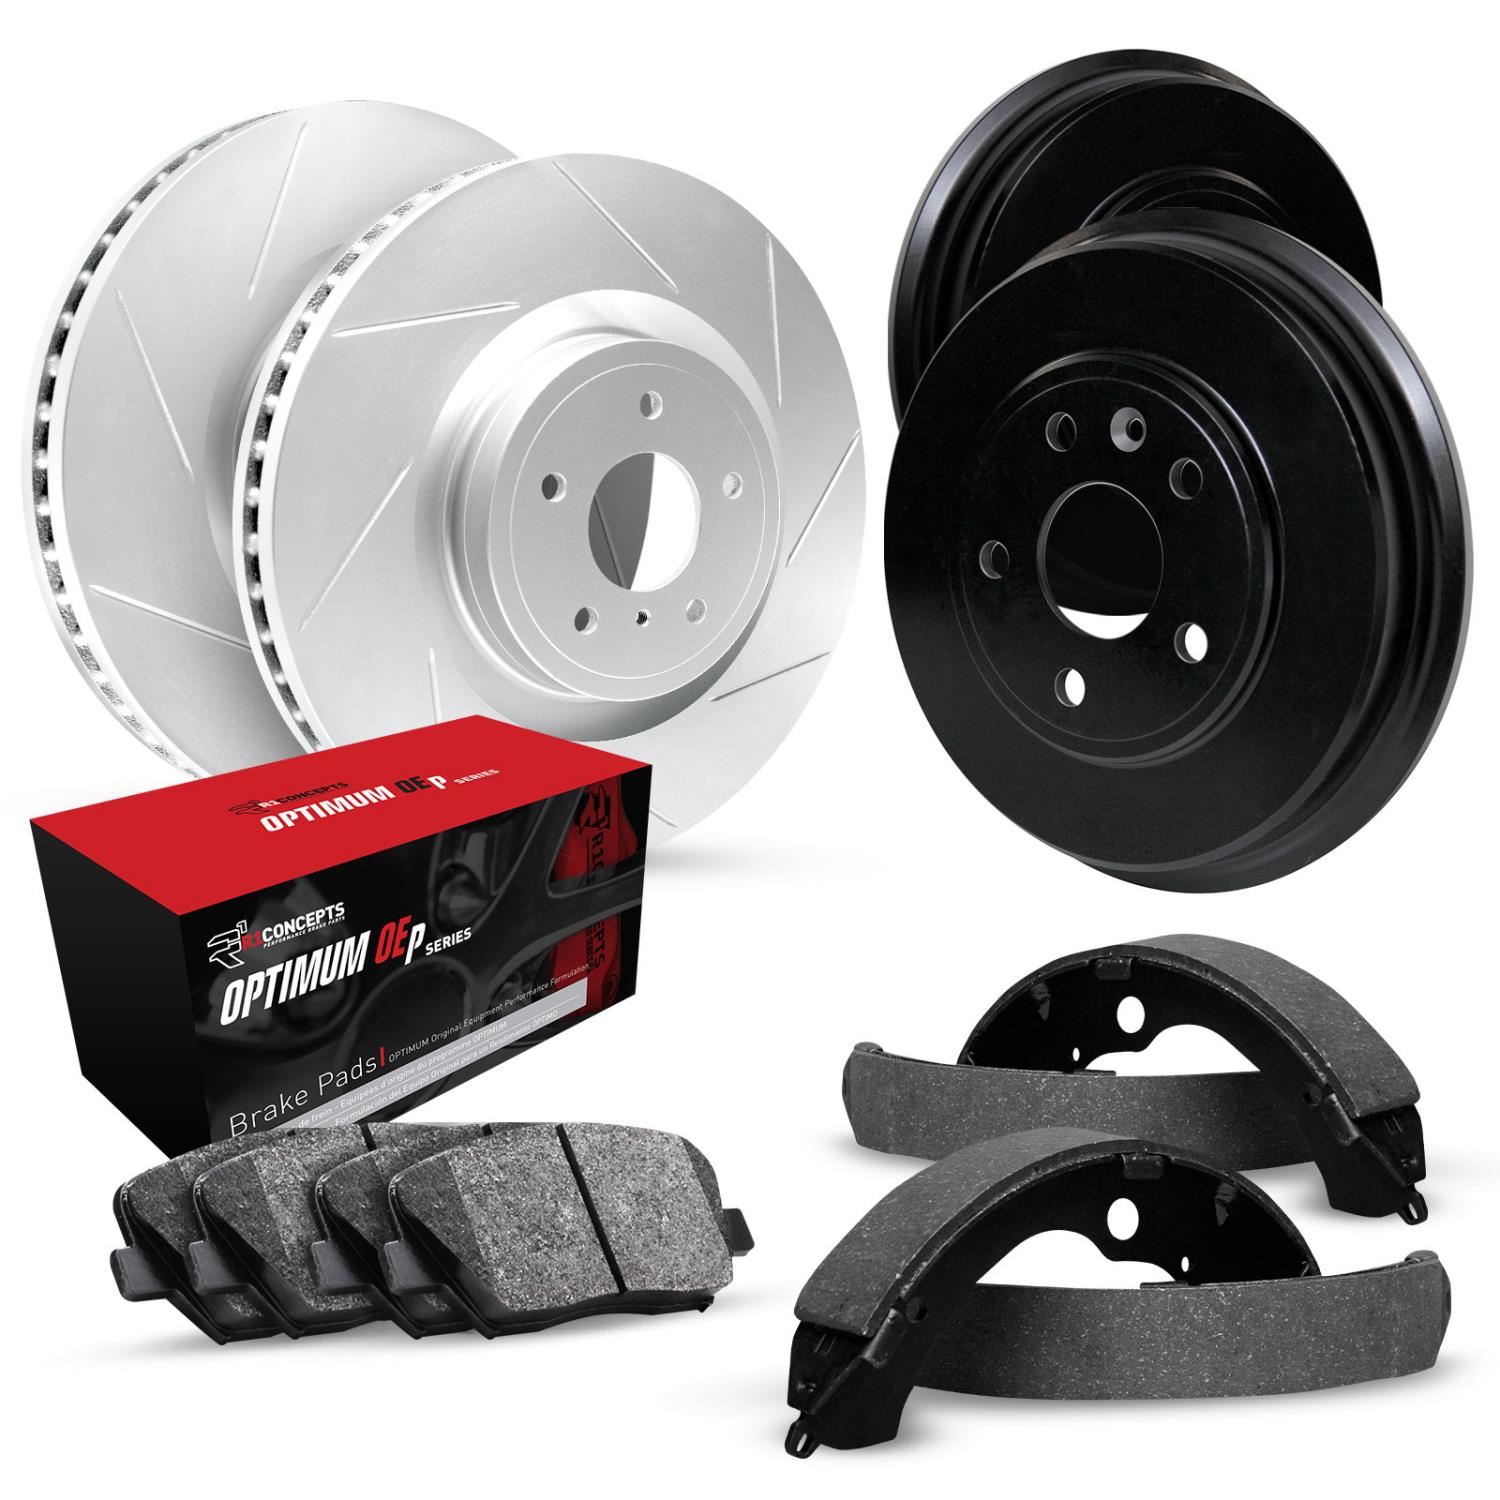 GEO-Carbon Slotted Brake Rotor & Drum Set w/Optimum OE Pads & Shoes, 1991-1998 GM, Position: Front & Rear